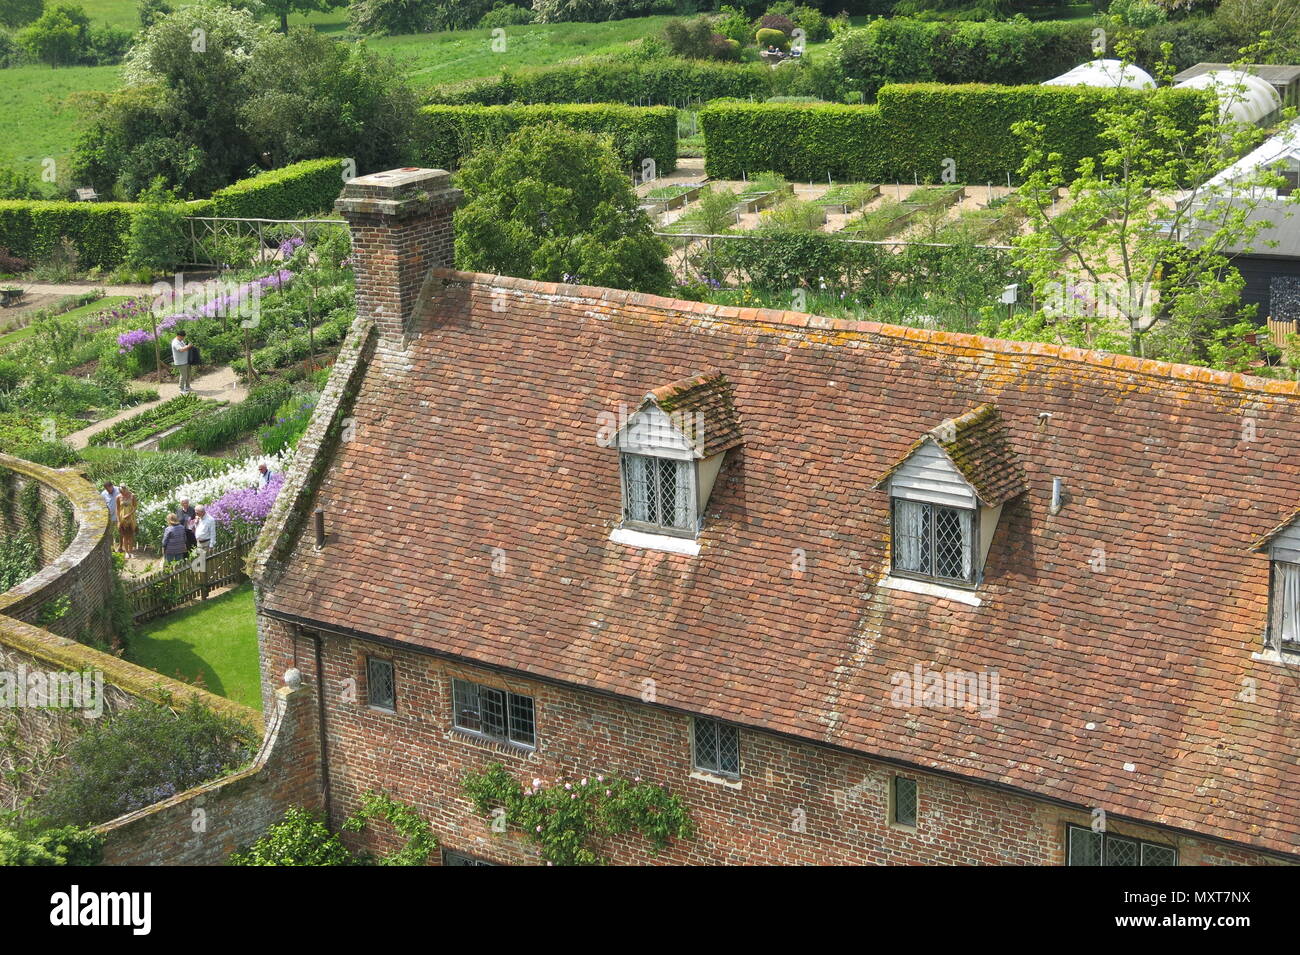 A view from the top of the tower at Sissinghurst Castle Garden, the National Trust property that was the home of Vita Sackville-West and her husband Stock Photo